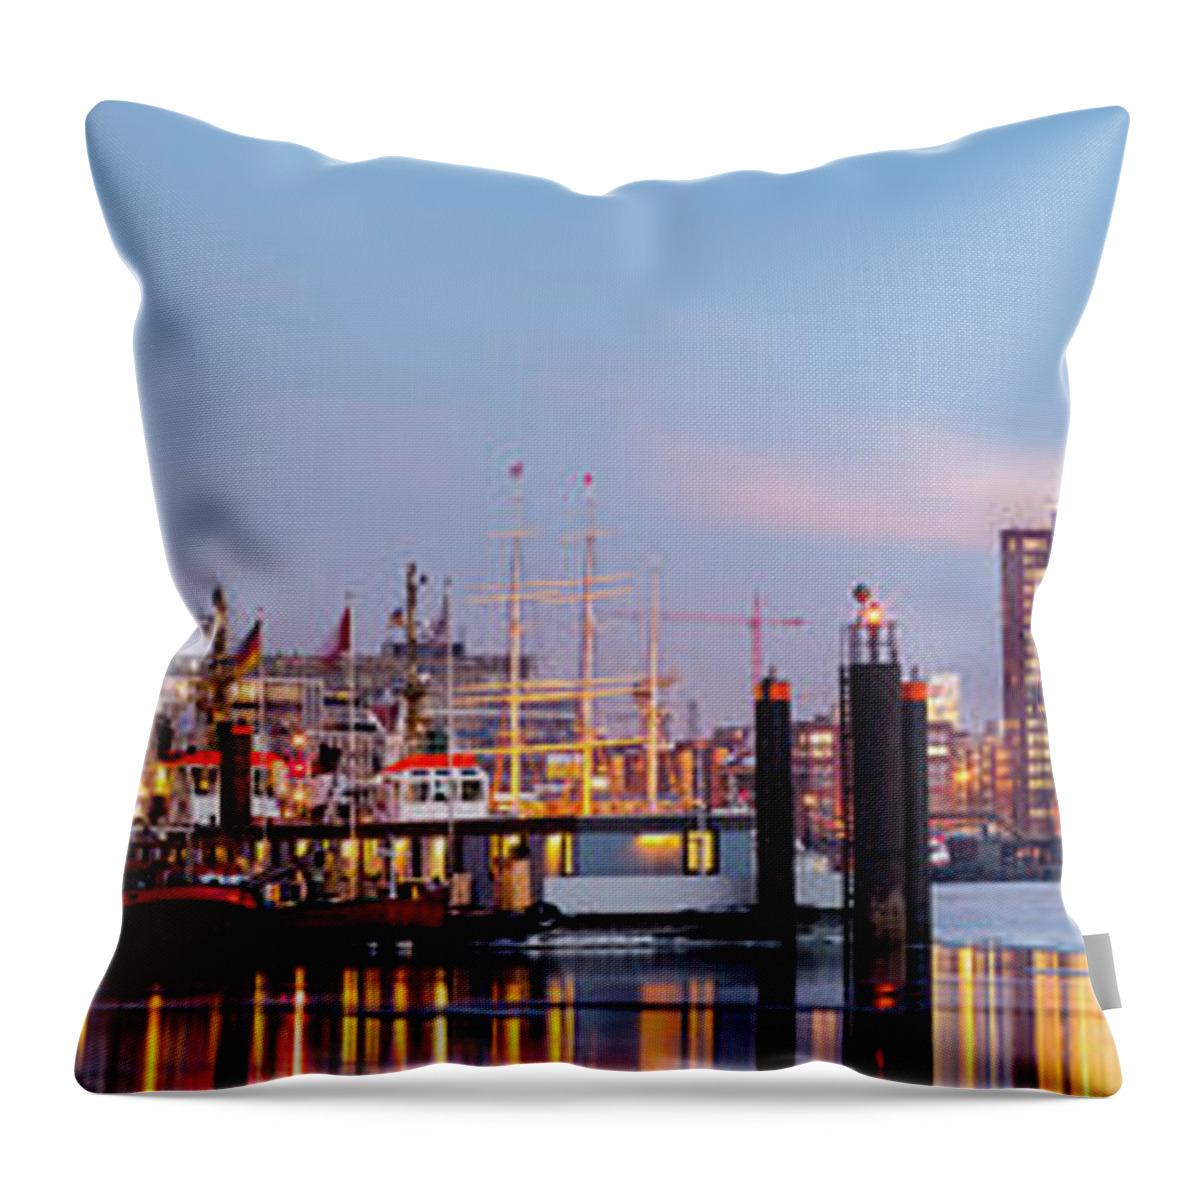 Trading Throw Pillow featuring the photograph Hamburg Harbour On Ice, Elbe River by Mf-guddyx